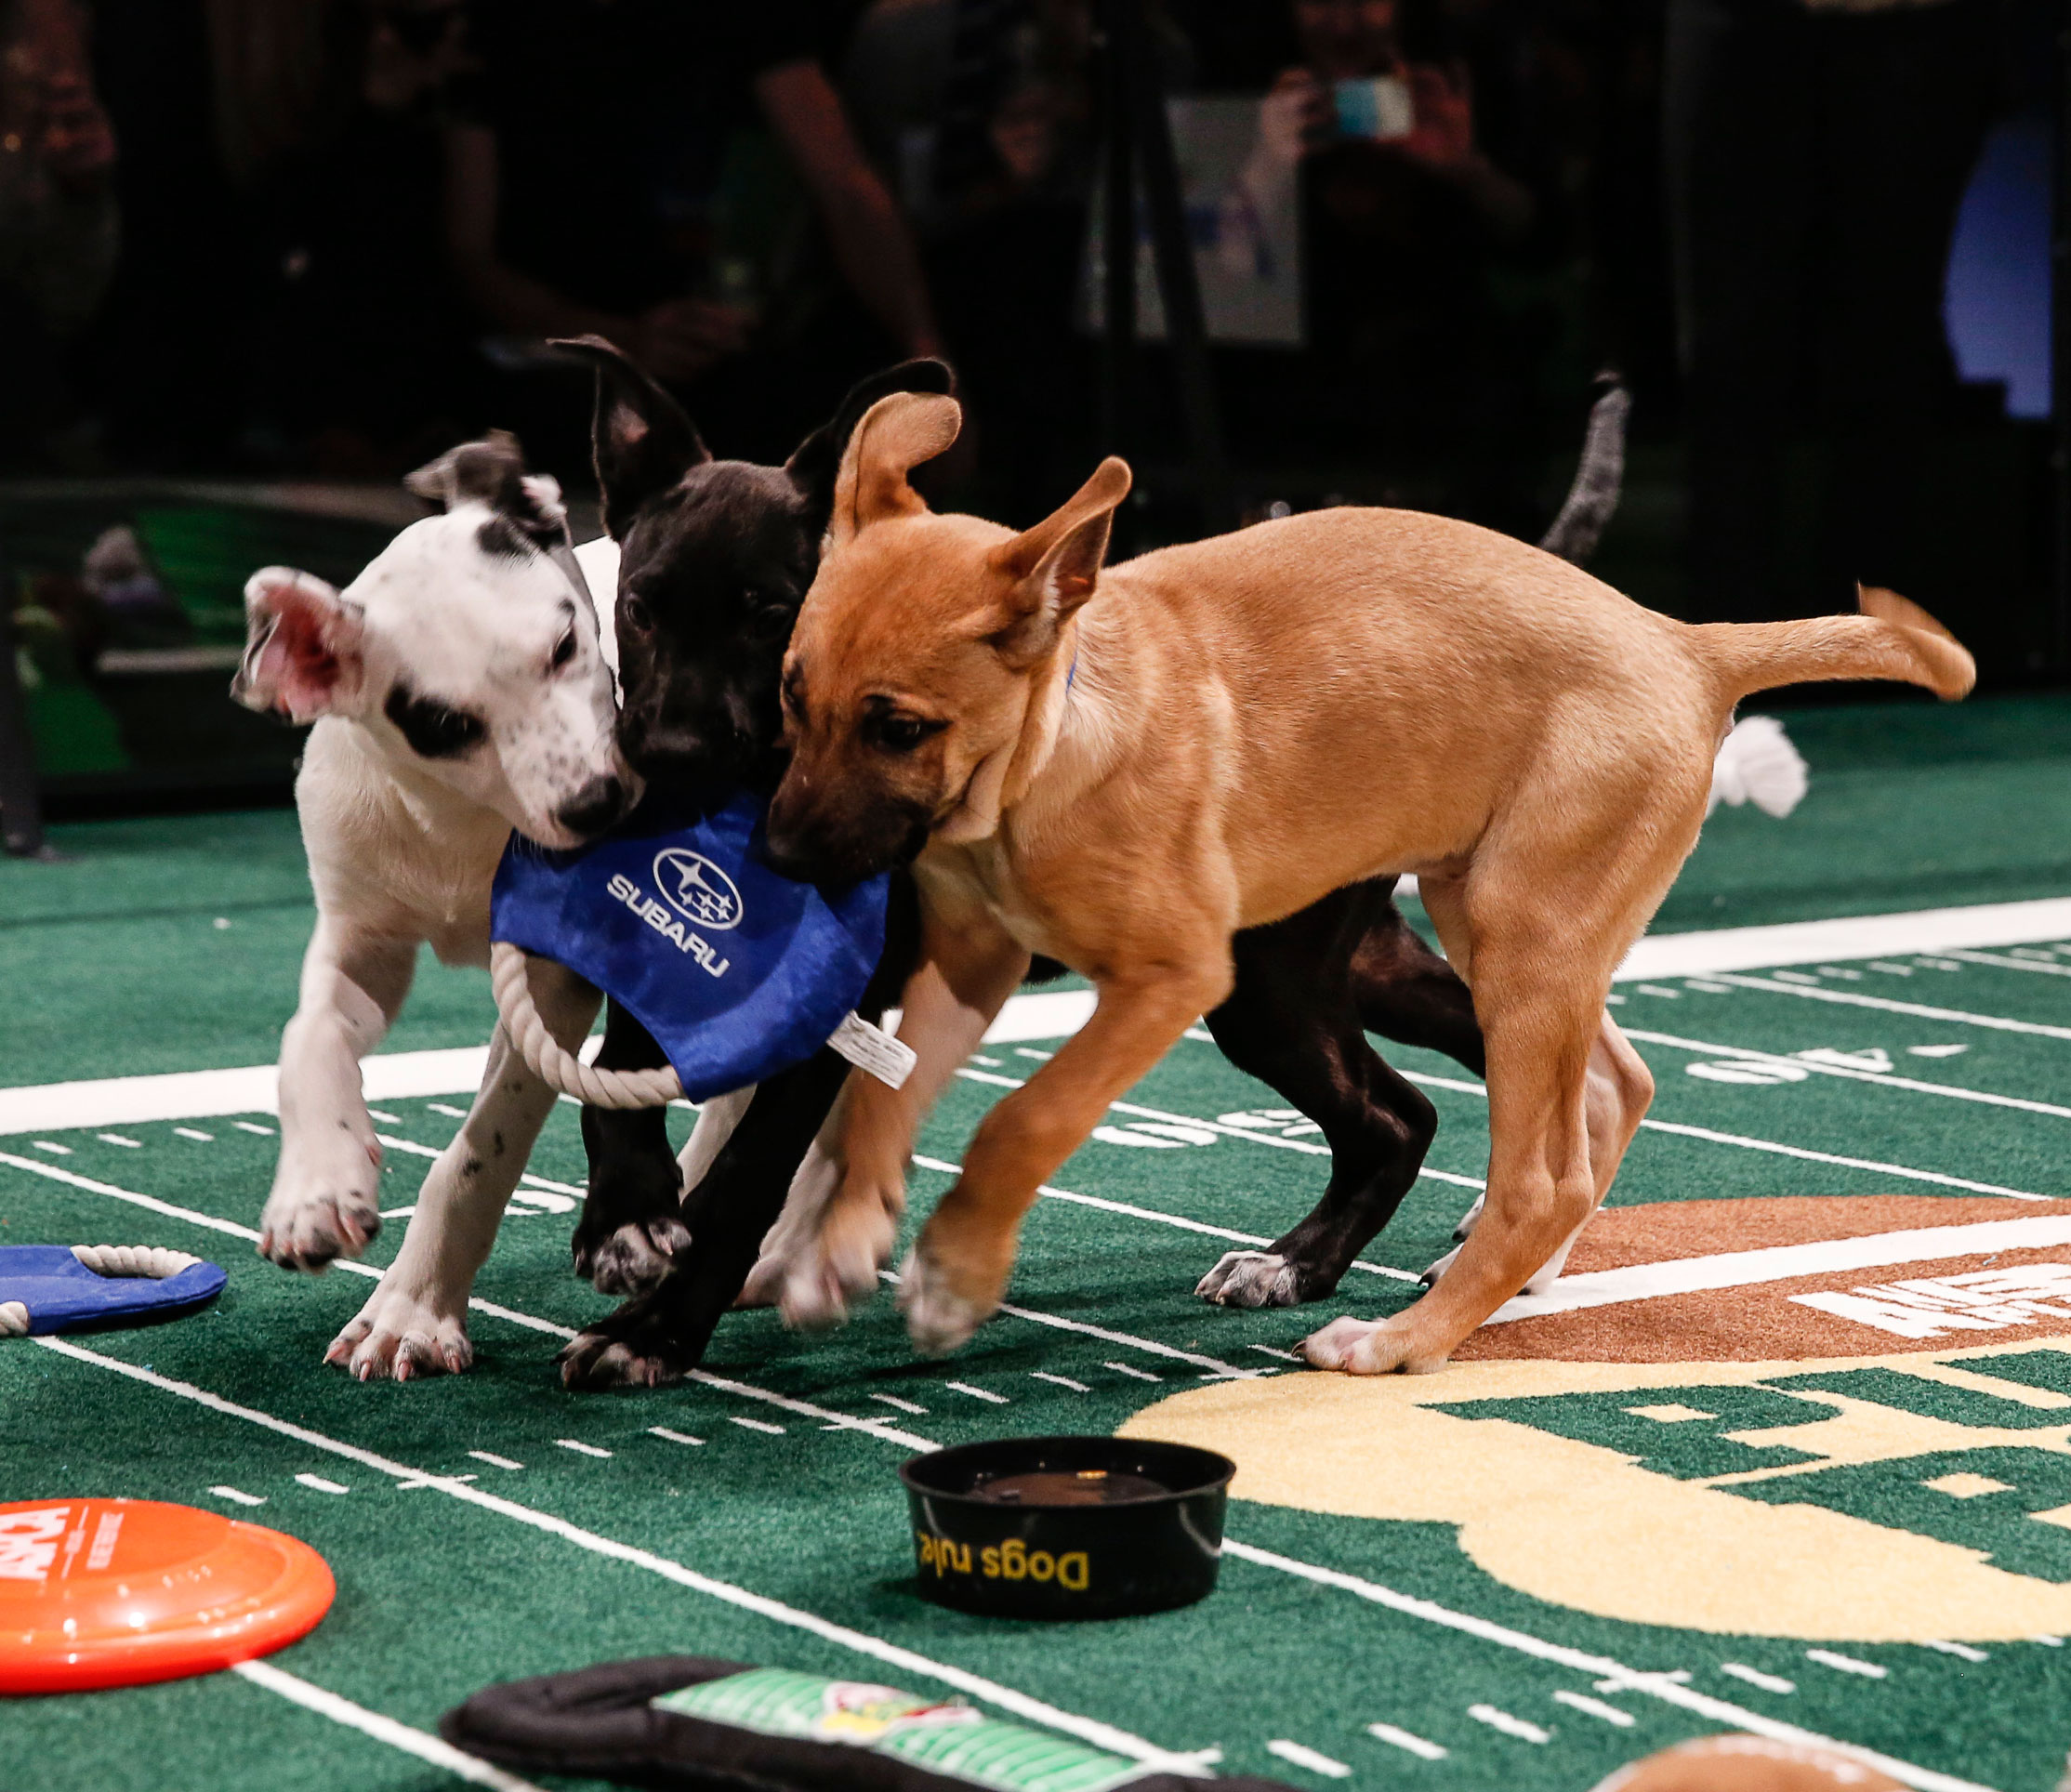 Puppies promise ‘Super Bowl of Cuteness’